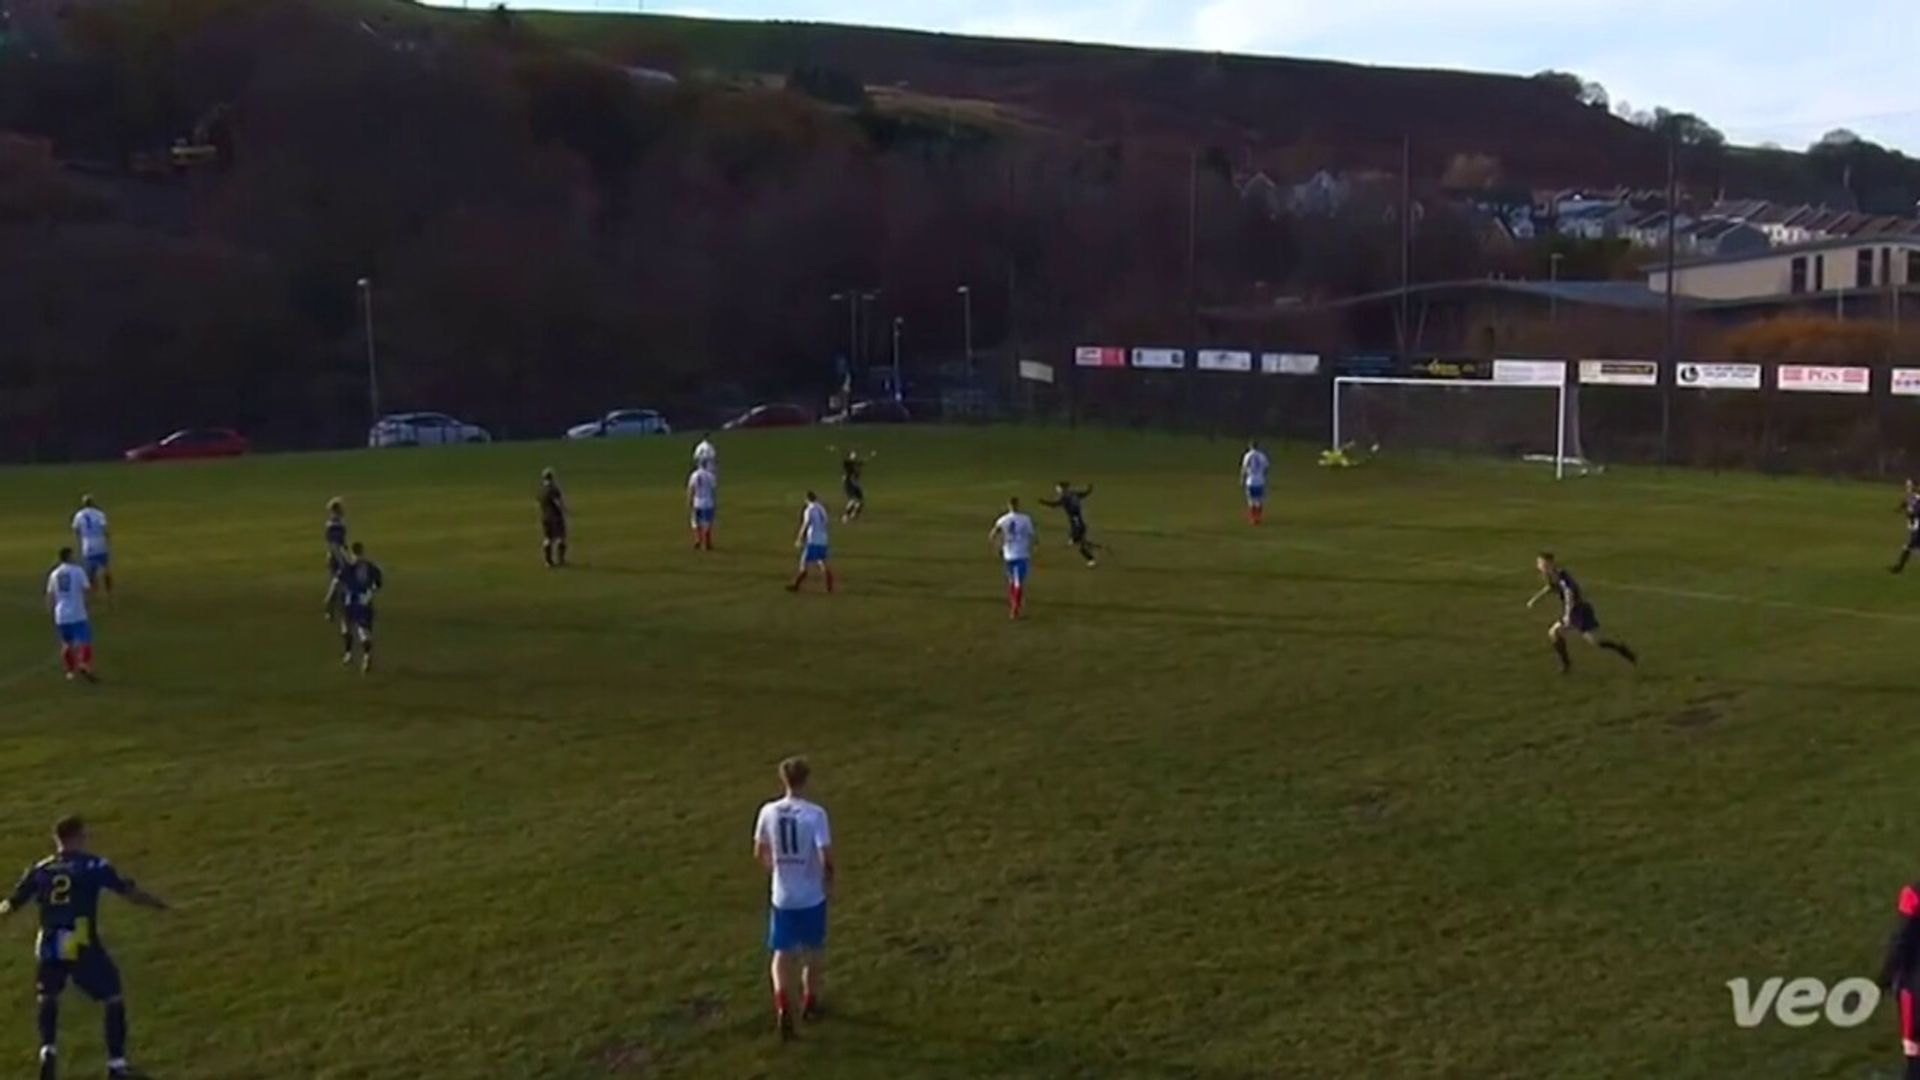 One of the best volleys ever ? A world-class strike from Welsh seventh tier!